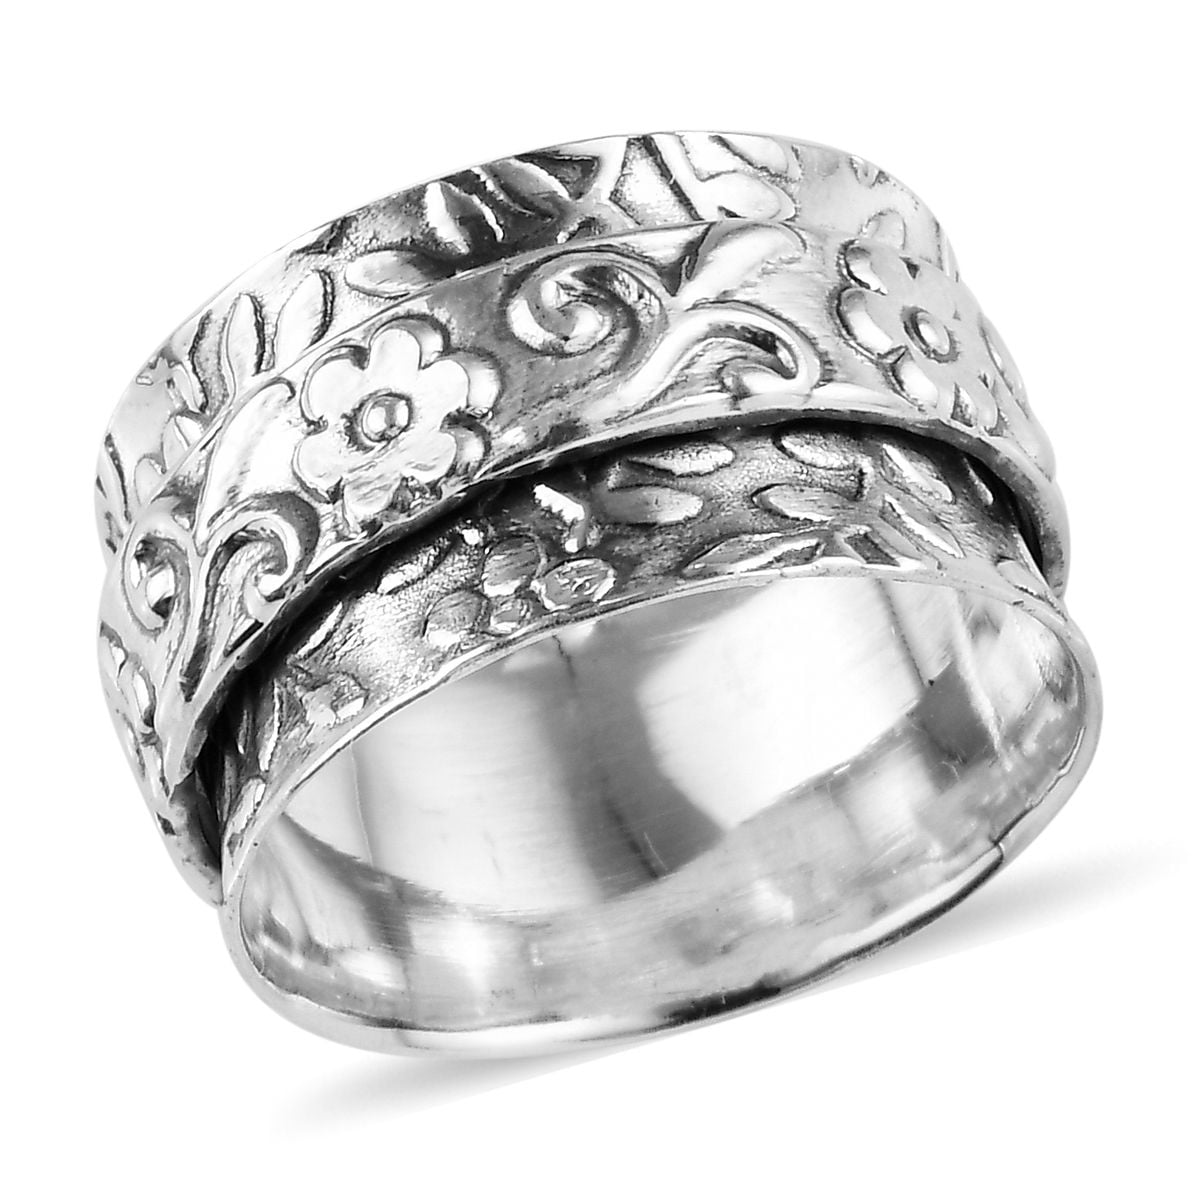 Shop LC - Stress Relieving Meditation Oxidized Spinner Ring 925 ...